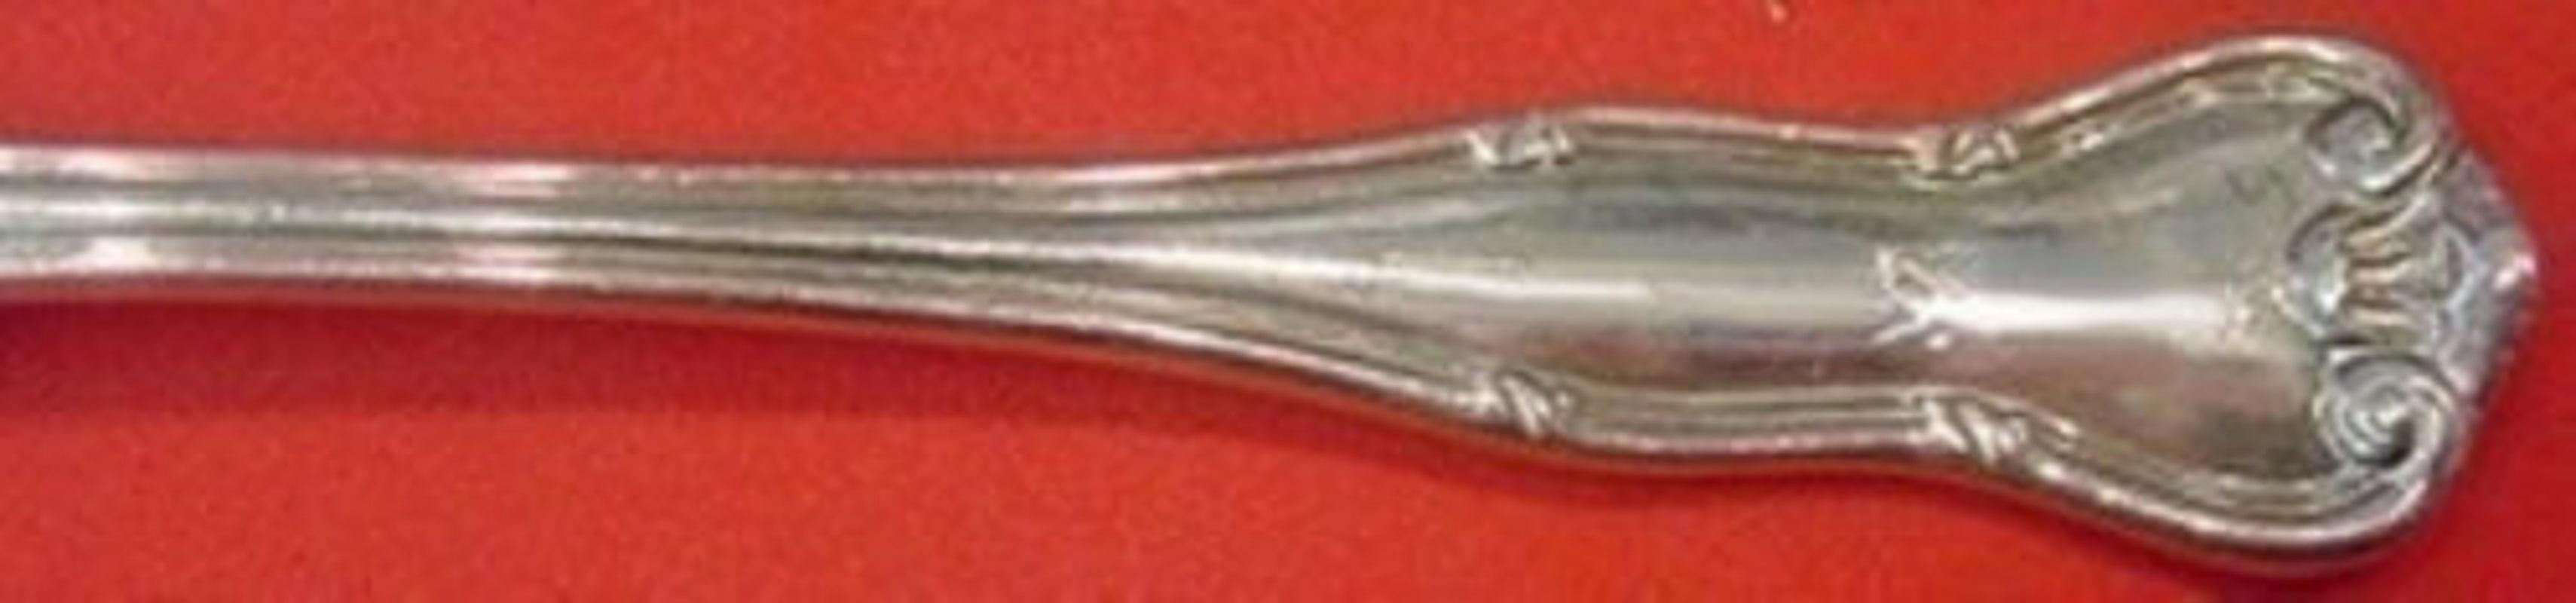 Sterling silver cream soup spoon, 6 7/8